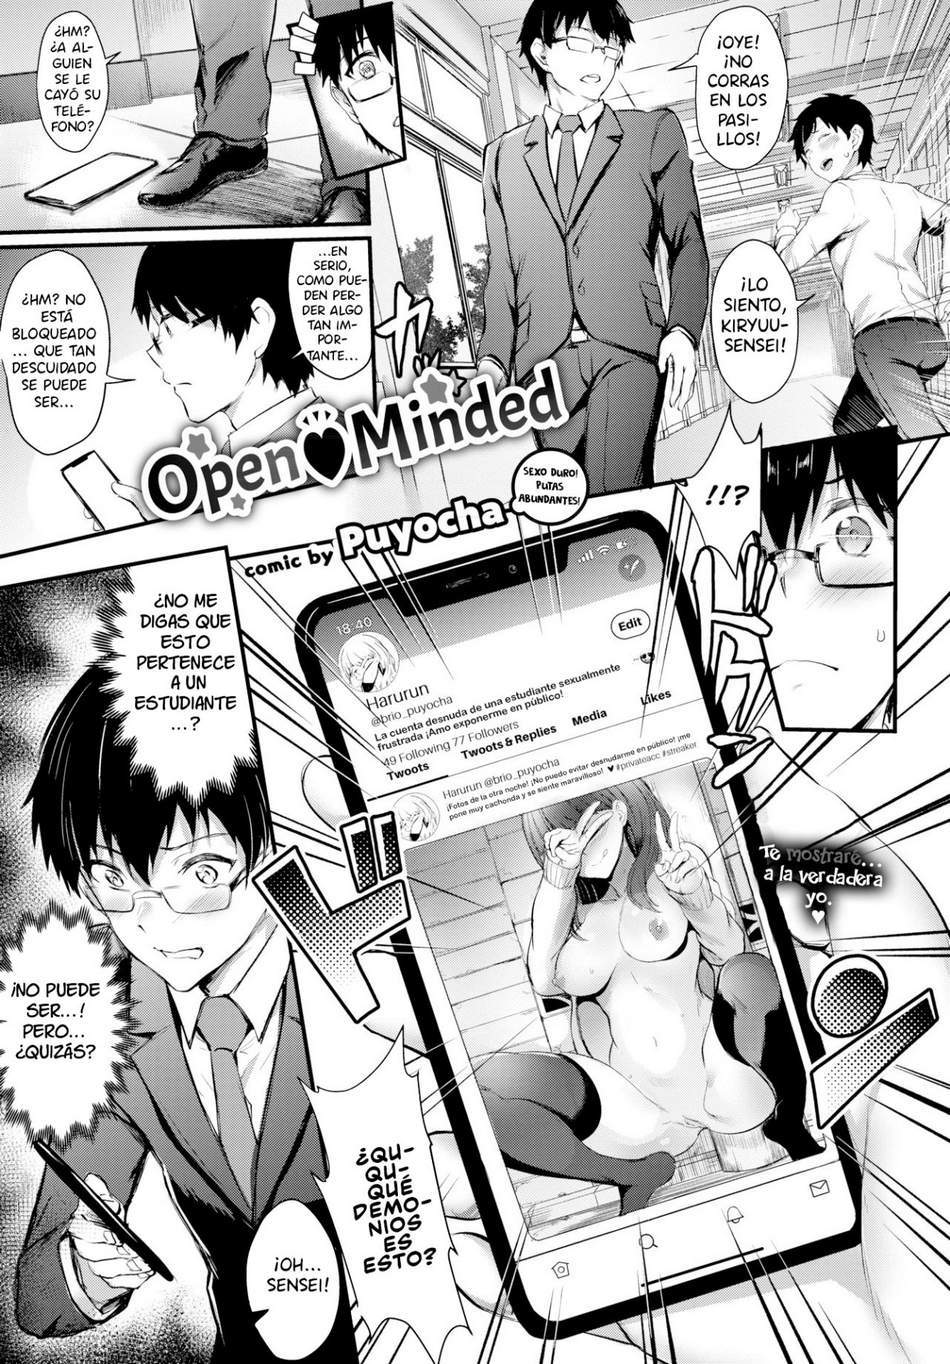 Open Minded - Page #1